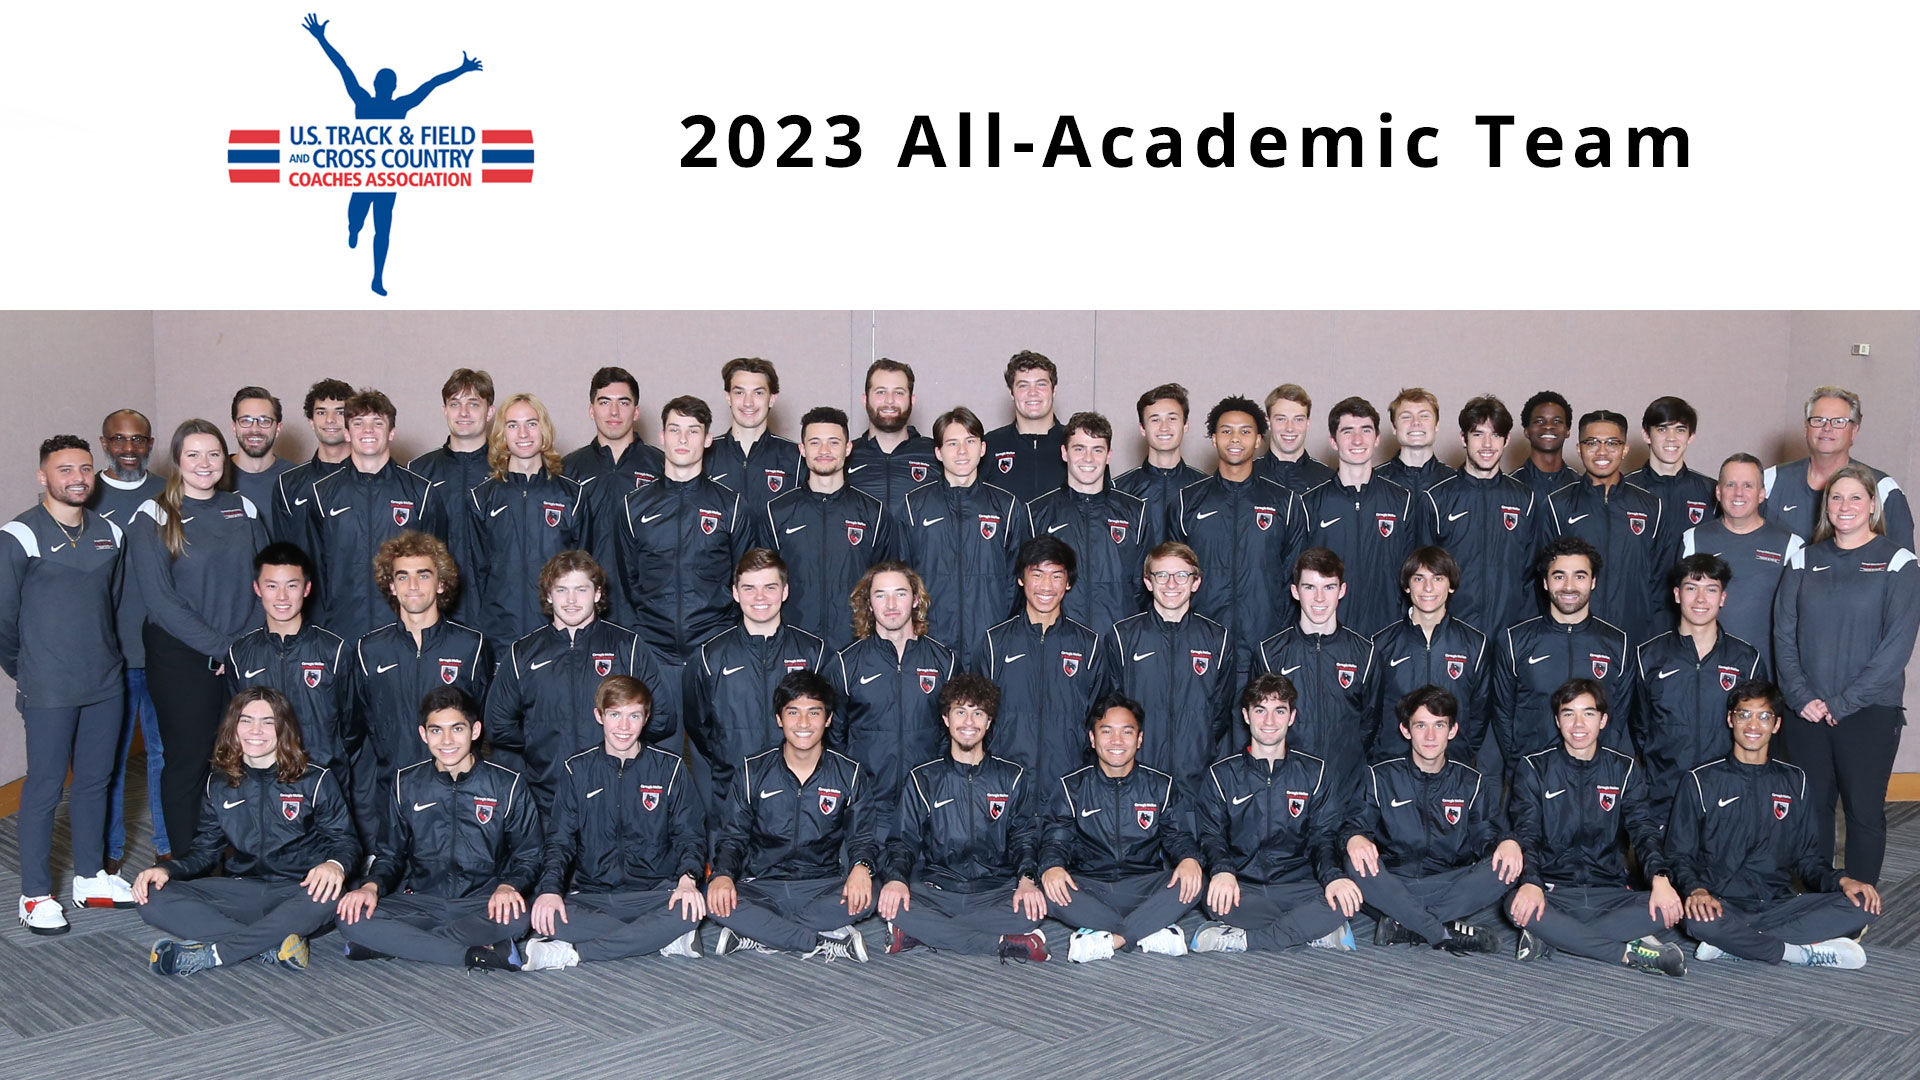 team photo of men's track and field team with USTFCCCA logo and text reading 2023 All-Academic Team